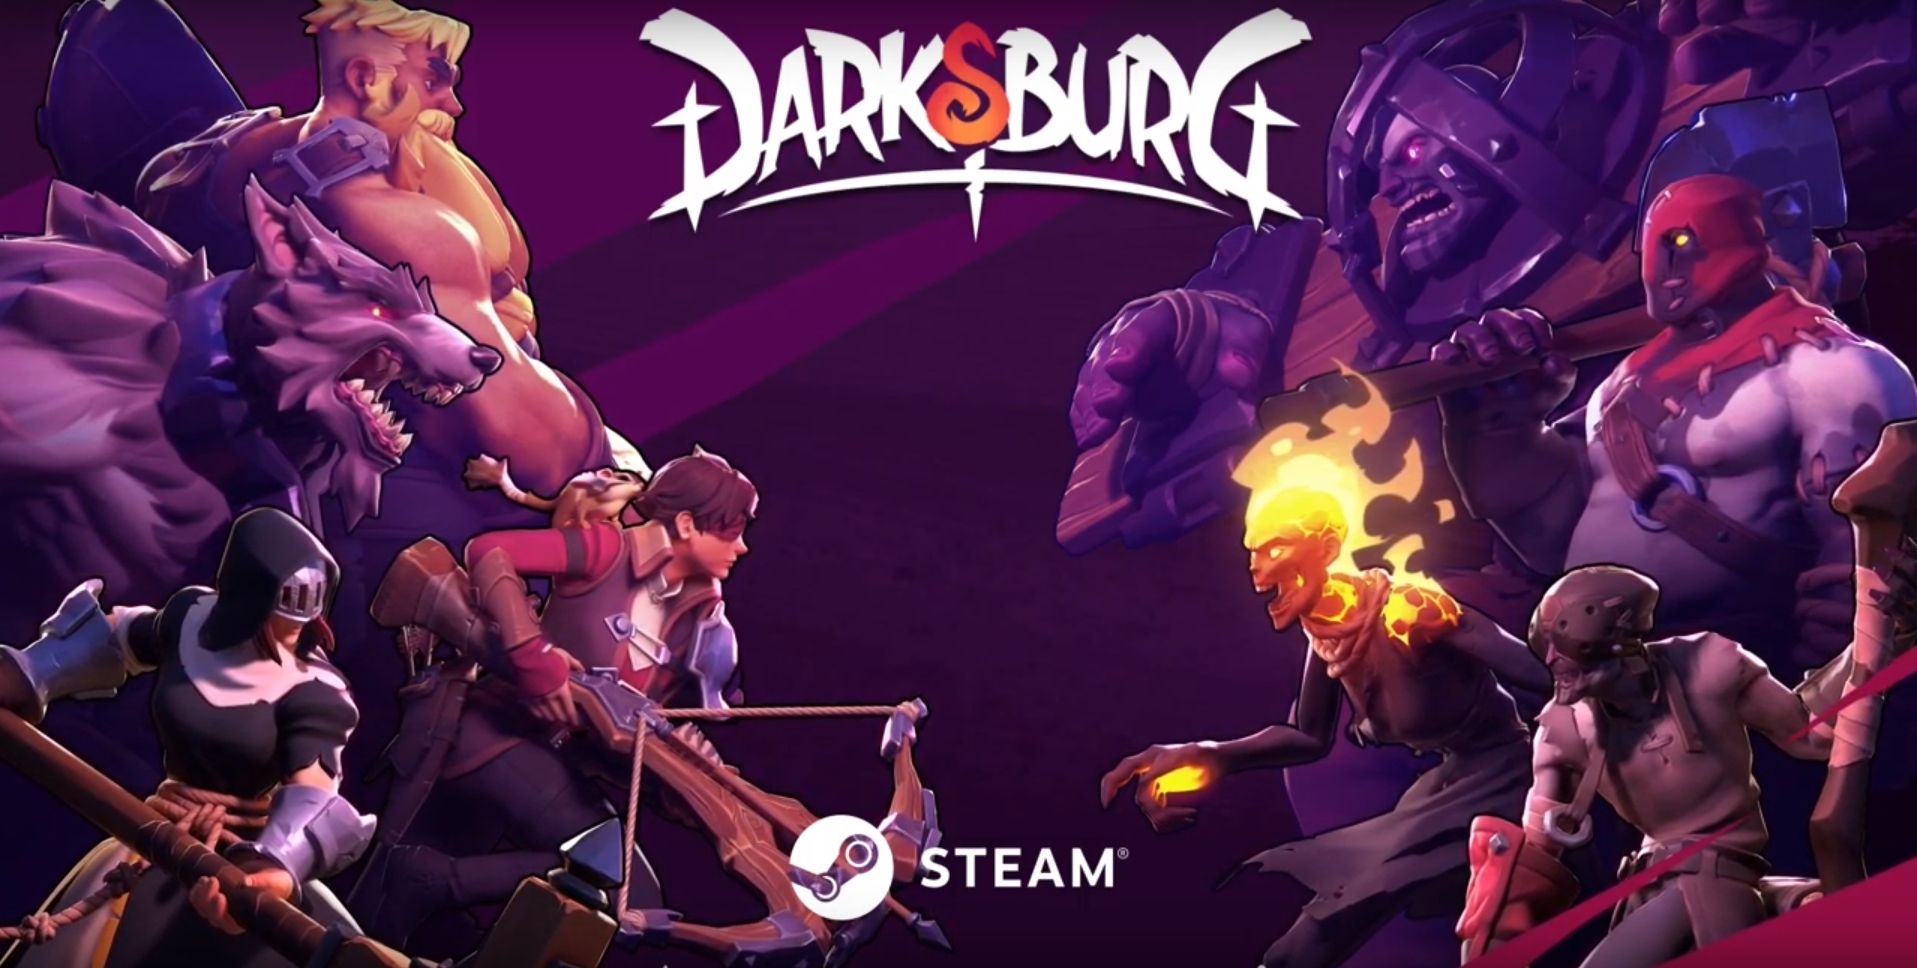 The Developer That Brought Us Northgard Is Returning With A Zombie Survival Game, Darksburg!